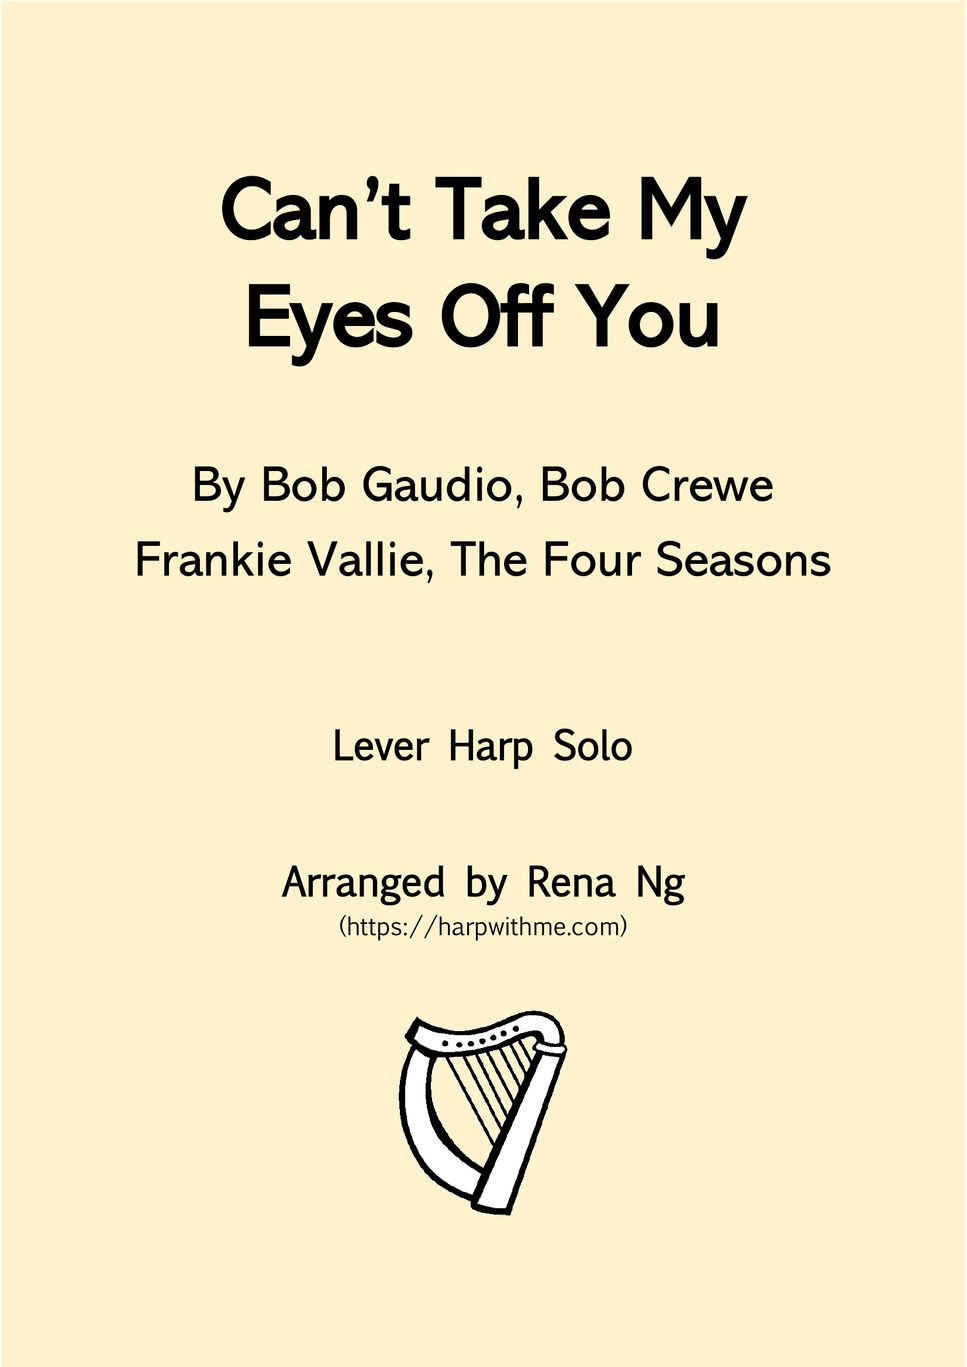 Frankie Valli - Can't Take My Eyes Off You (Lever Harp Solo) - Advanced Intermediate by Harp With Me